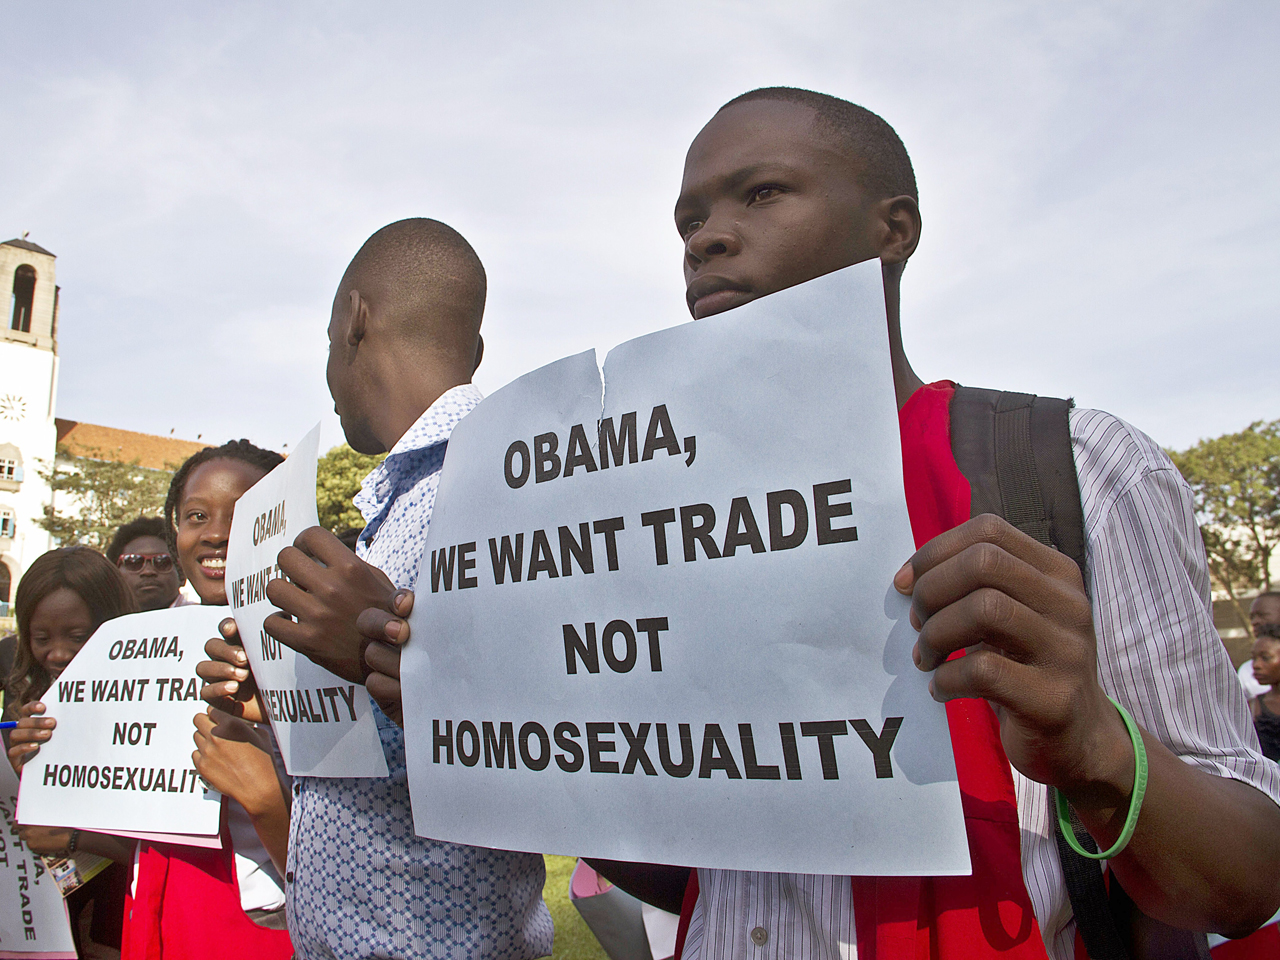 Uganda holds "thanksgiving" event for antigay laws CBS News